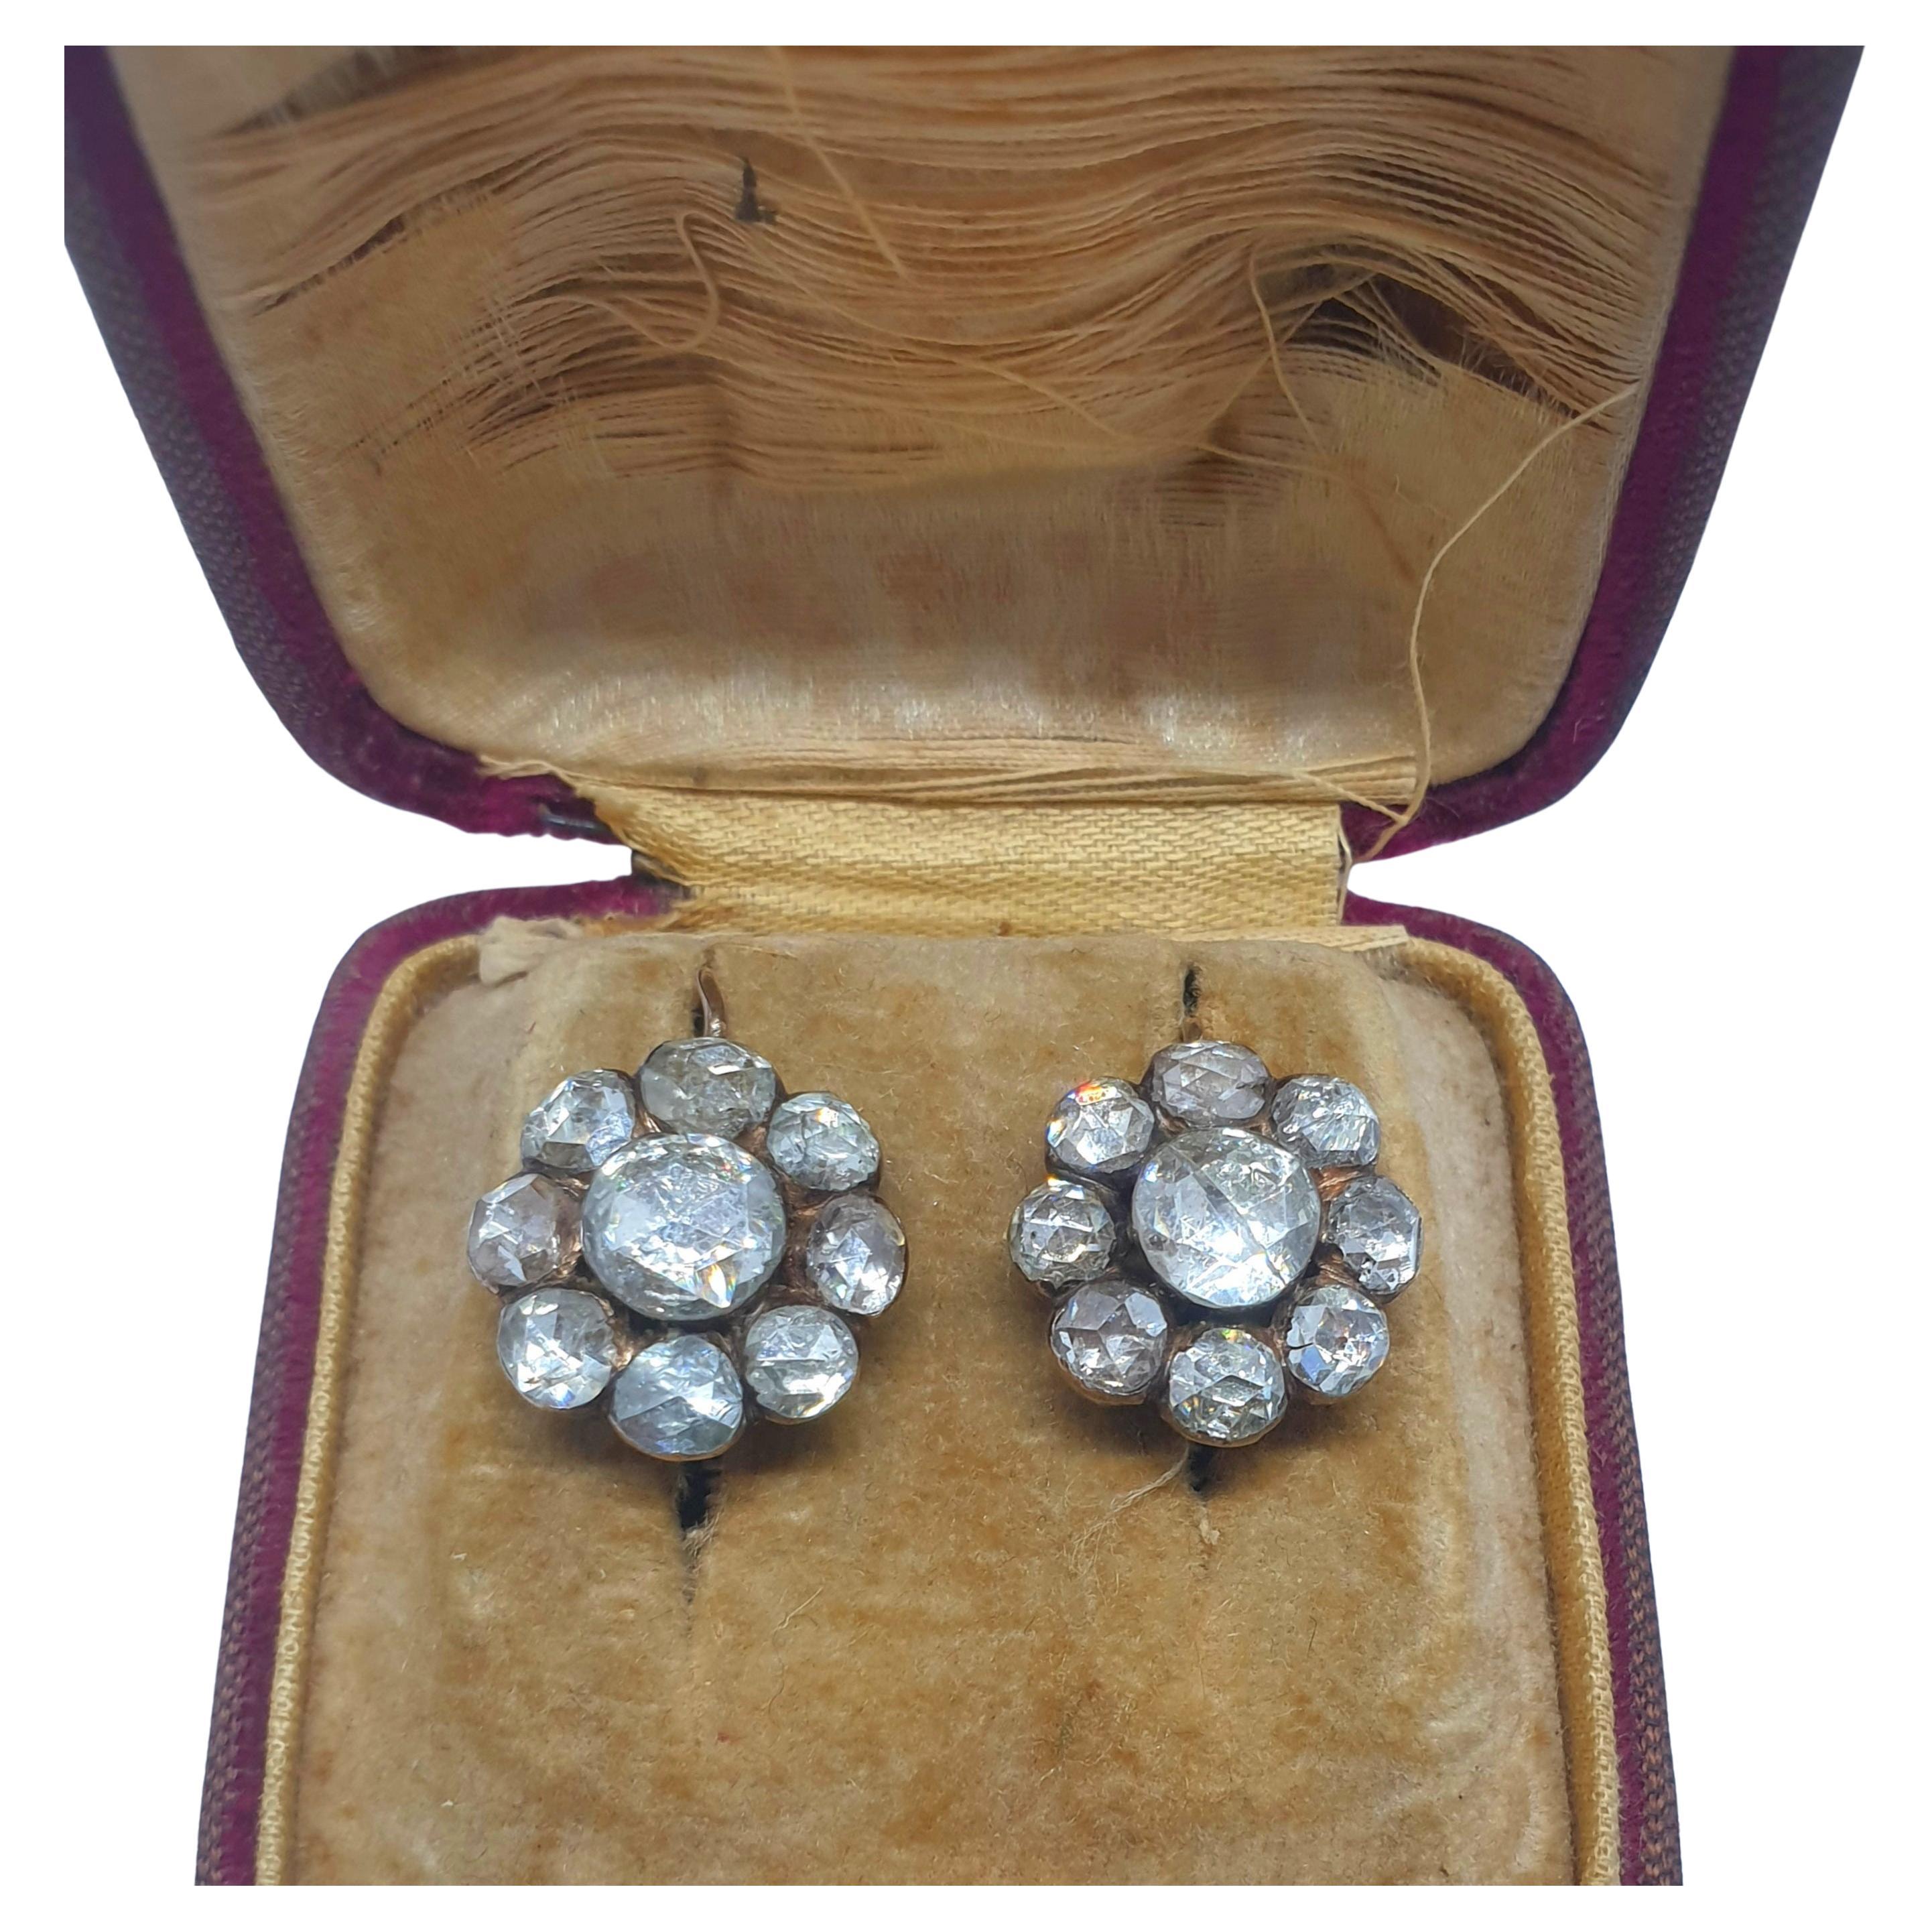 Antique rose cut diamond earrings in floral design with large rose cut diamonds with a total estimate diamond weight of 11 carats center stone diameter 7.30mm/ smaller stone diameter 5.30mm and earing head diameter 15.70 mm back foiled old technique